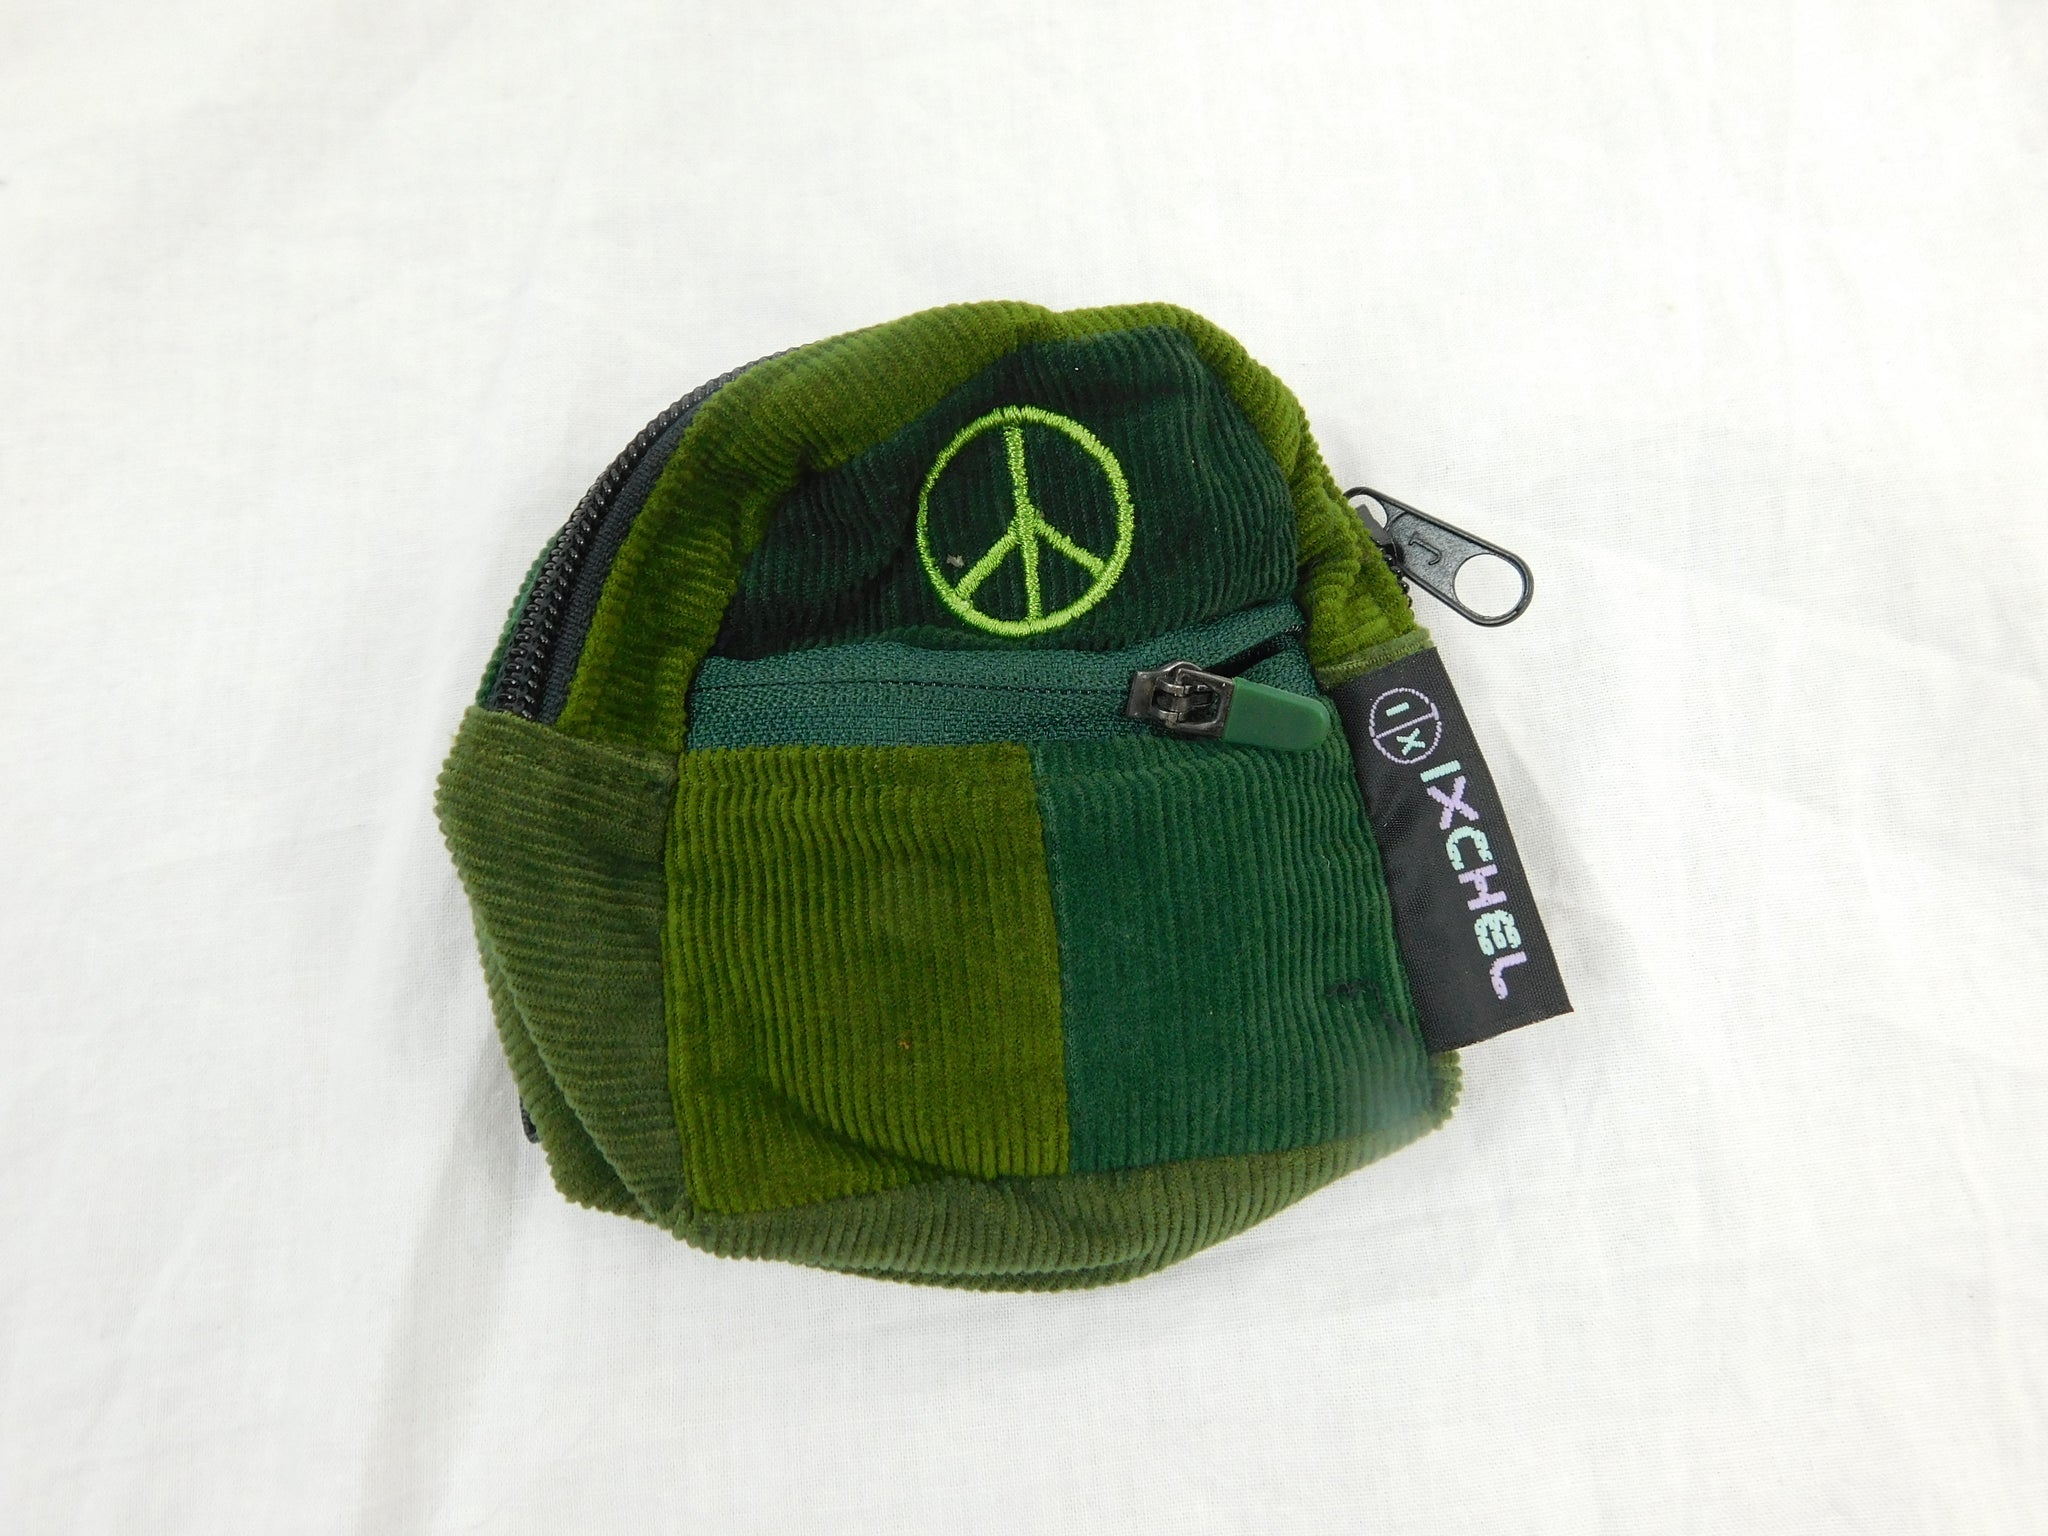 patctchwork corduroy micro Backpack with peace sign Embroidery